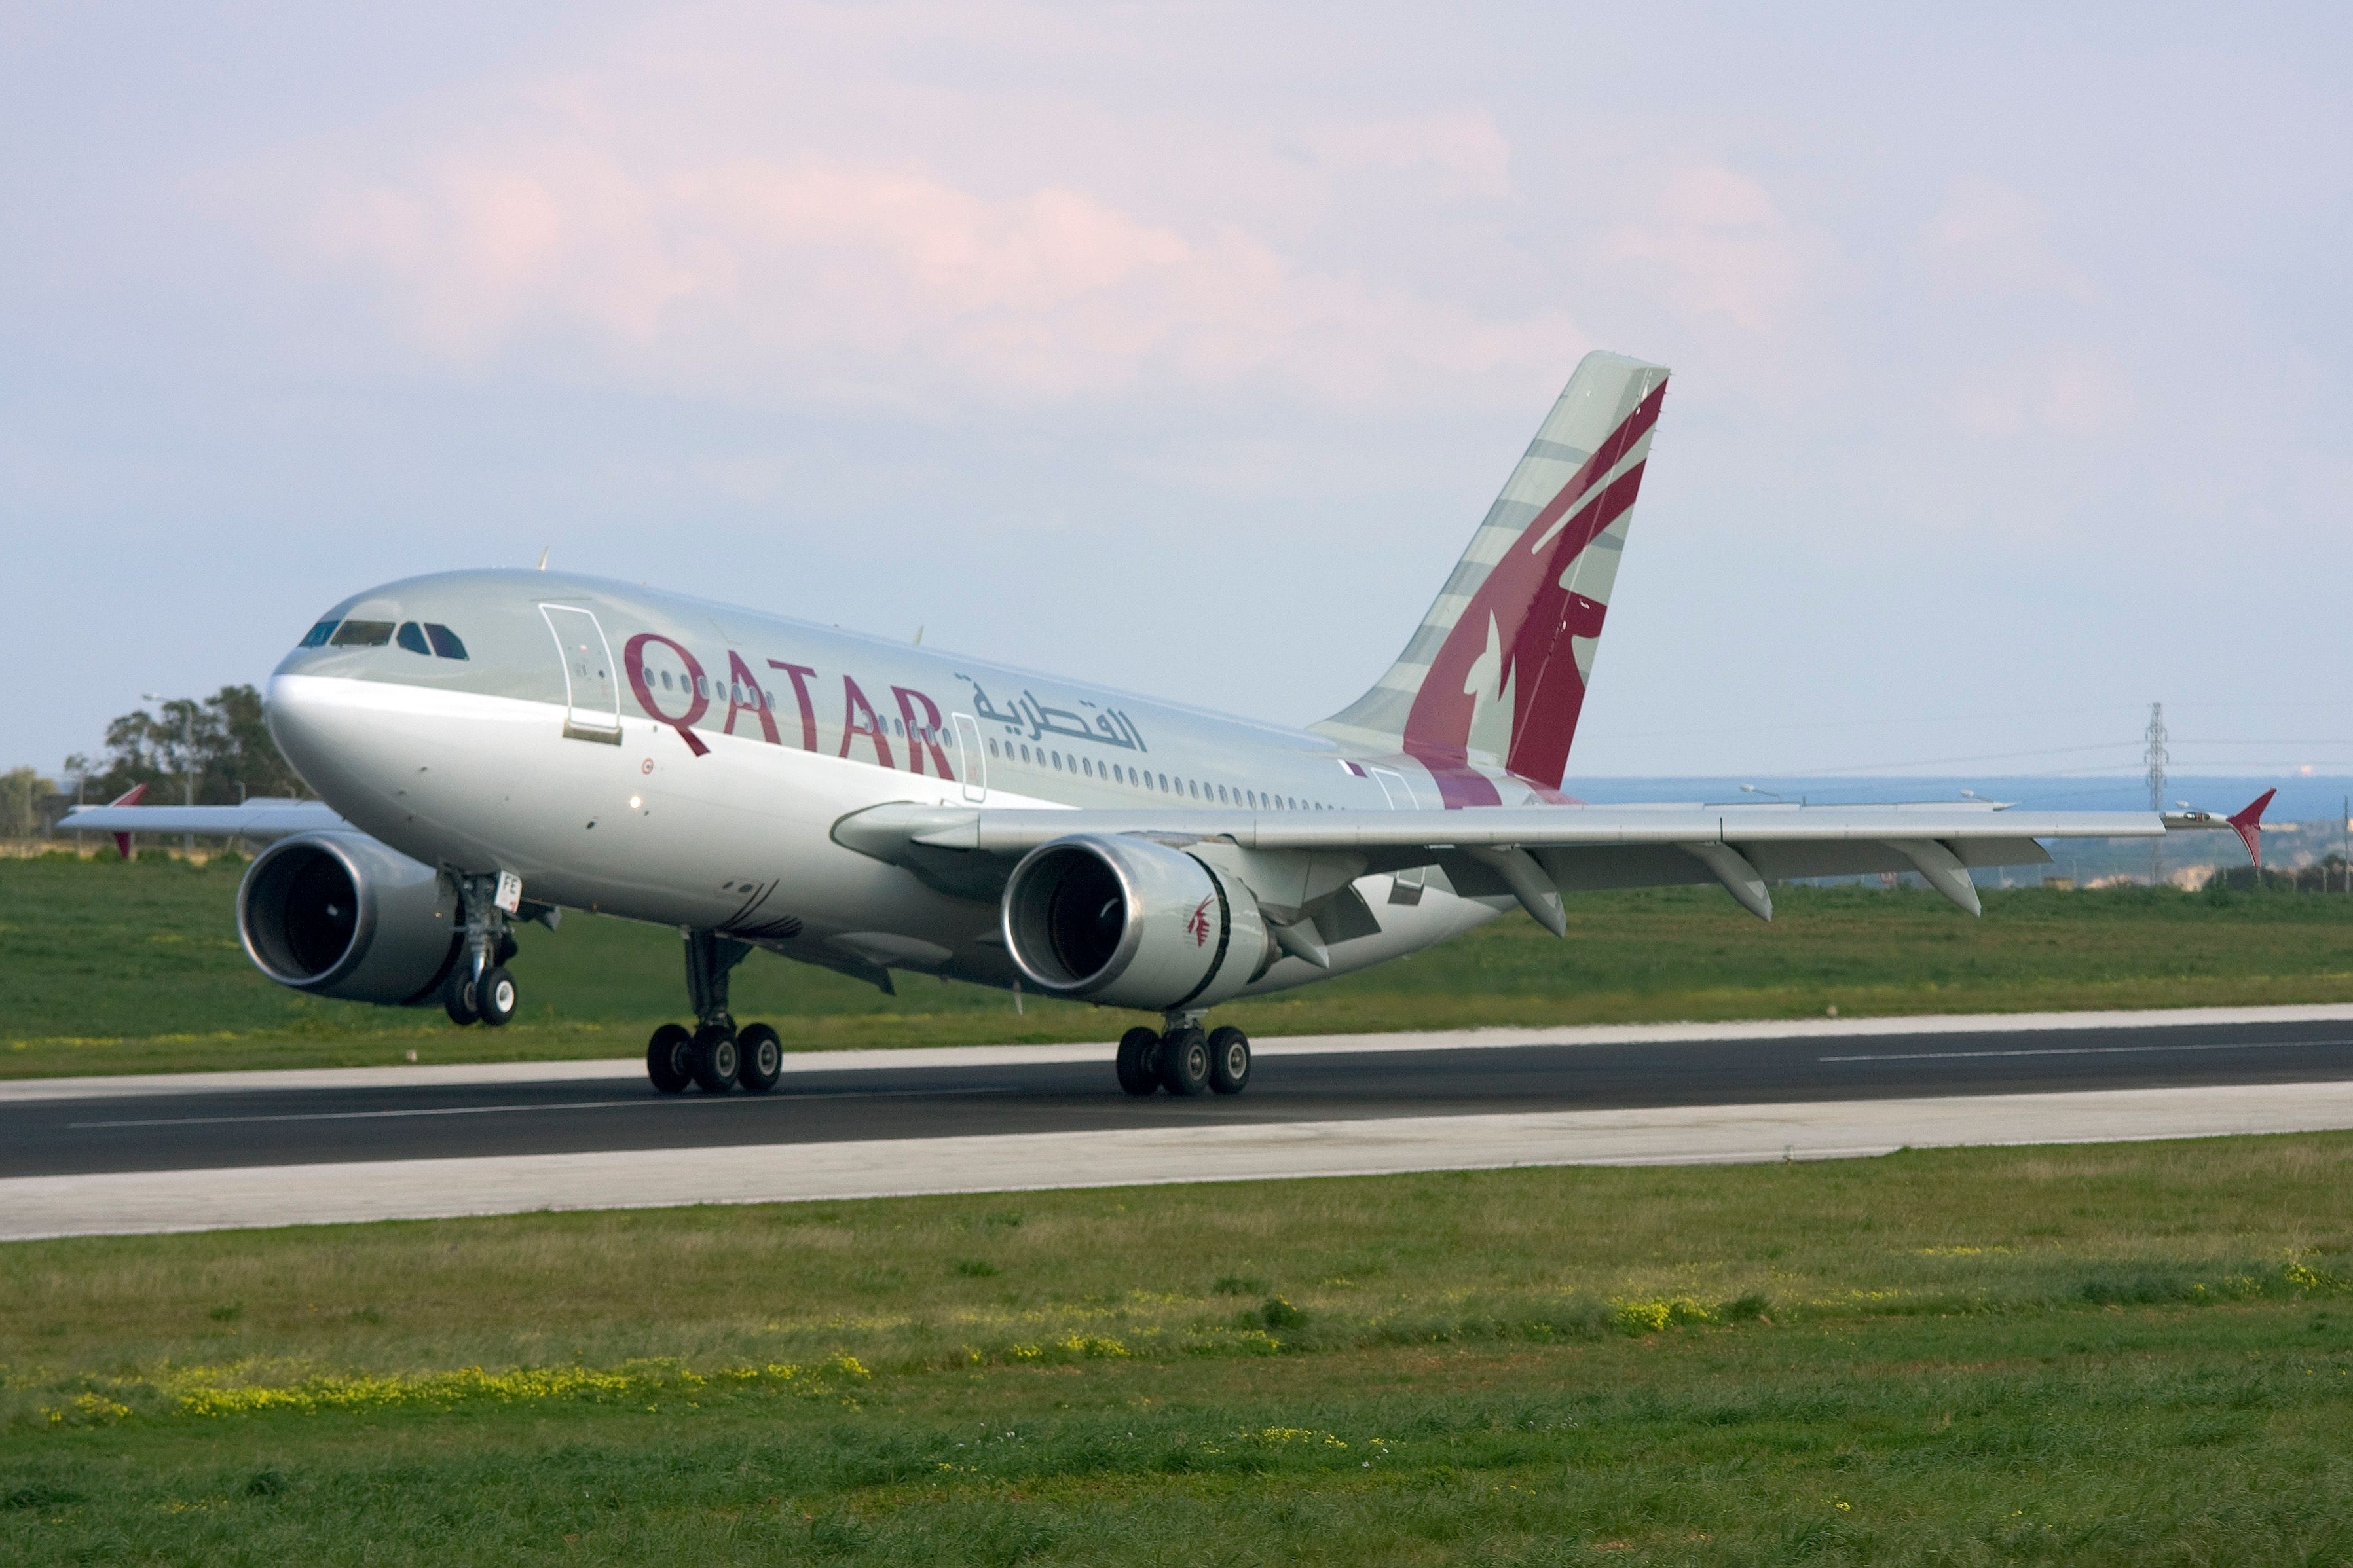 A Qatar Airways Airbus A310 about to take off.